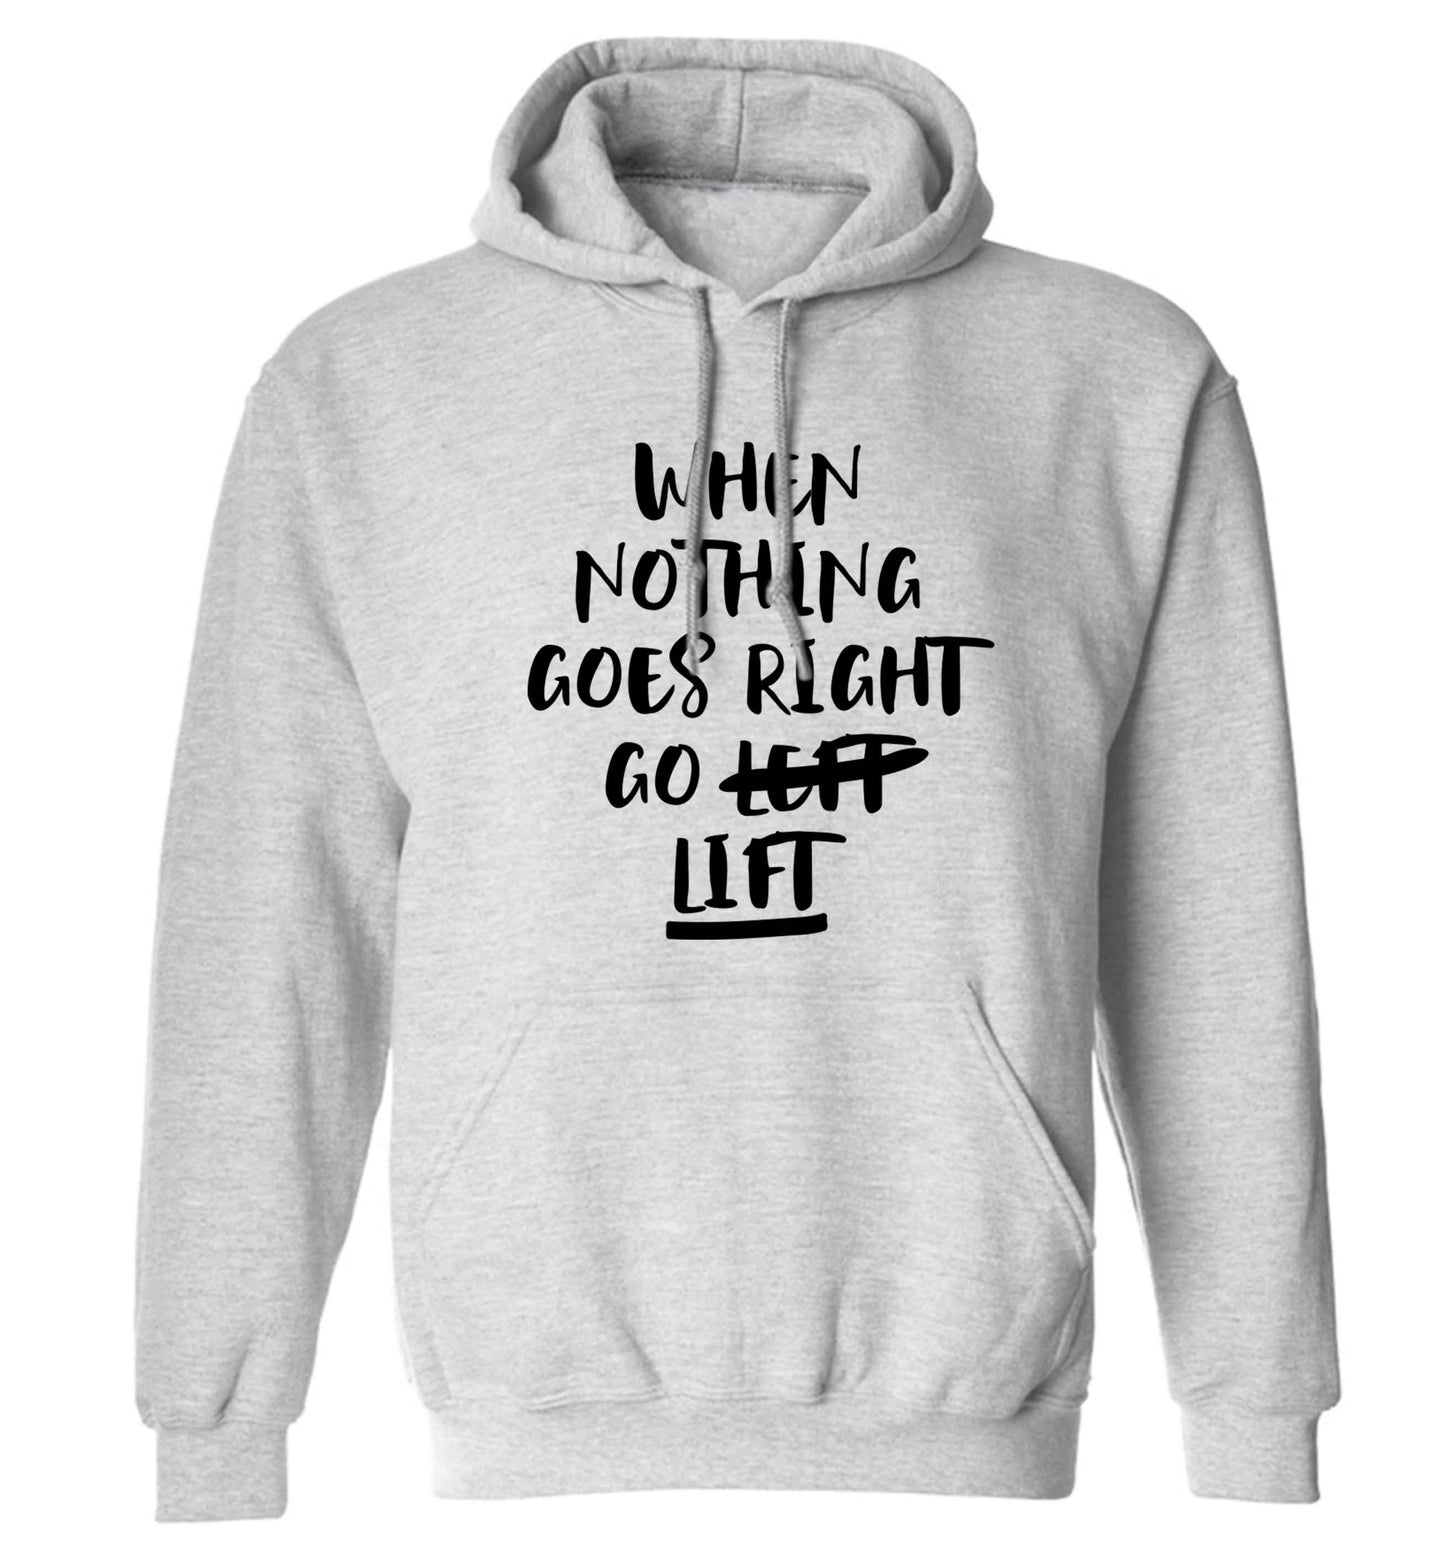 When nothing goes right go lift adults unisex grey hoodie 2XL